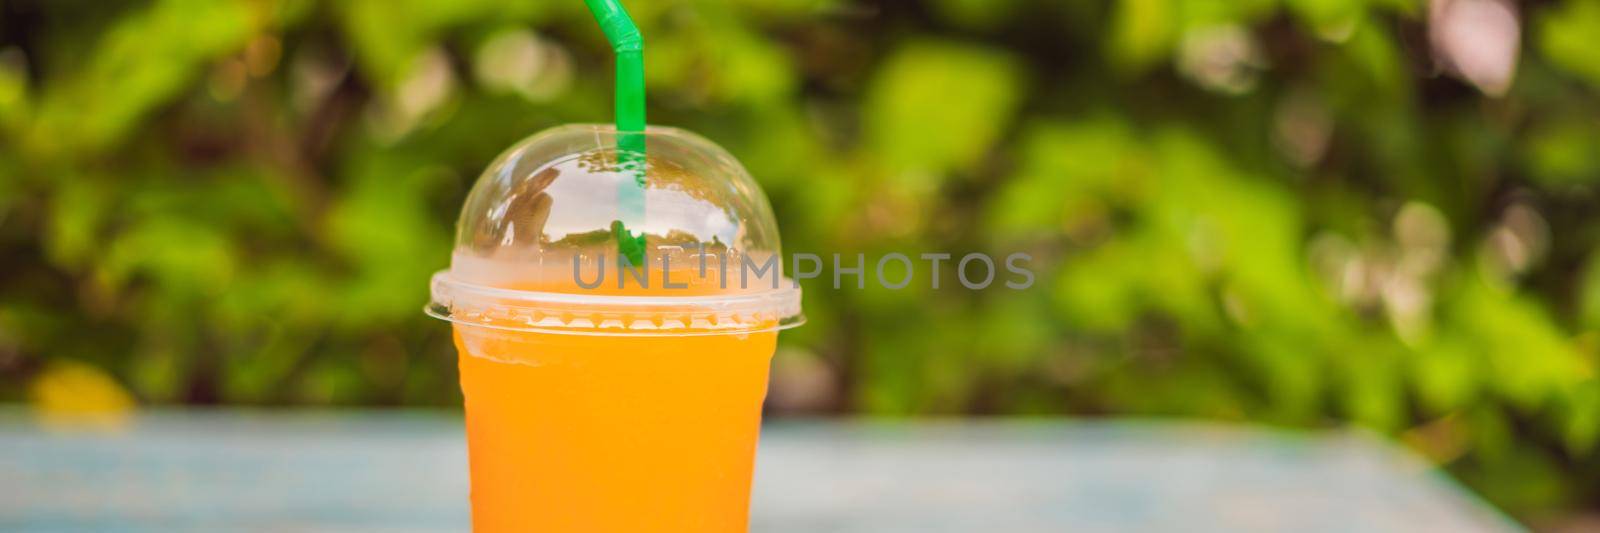 Still Life Glass of Fresh Orange Juice on Vintage Wood Table with Copy Space Background. BANNER, LONG FORMAT